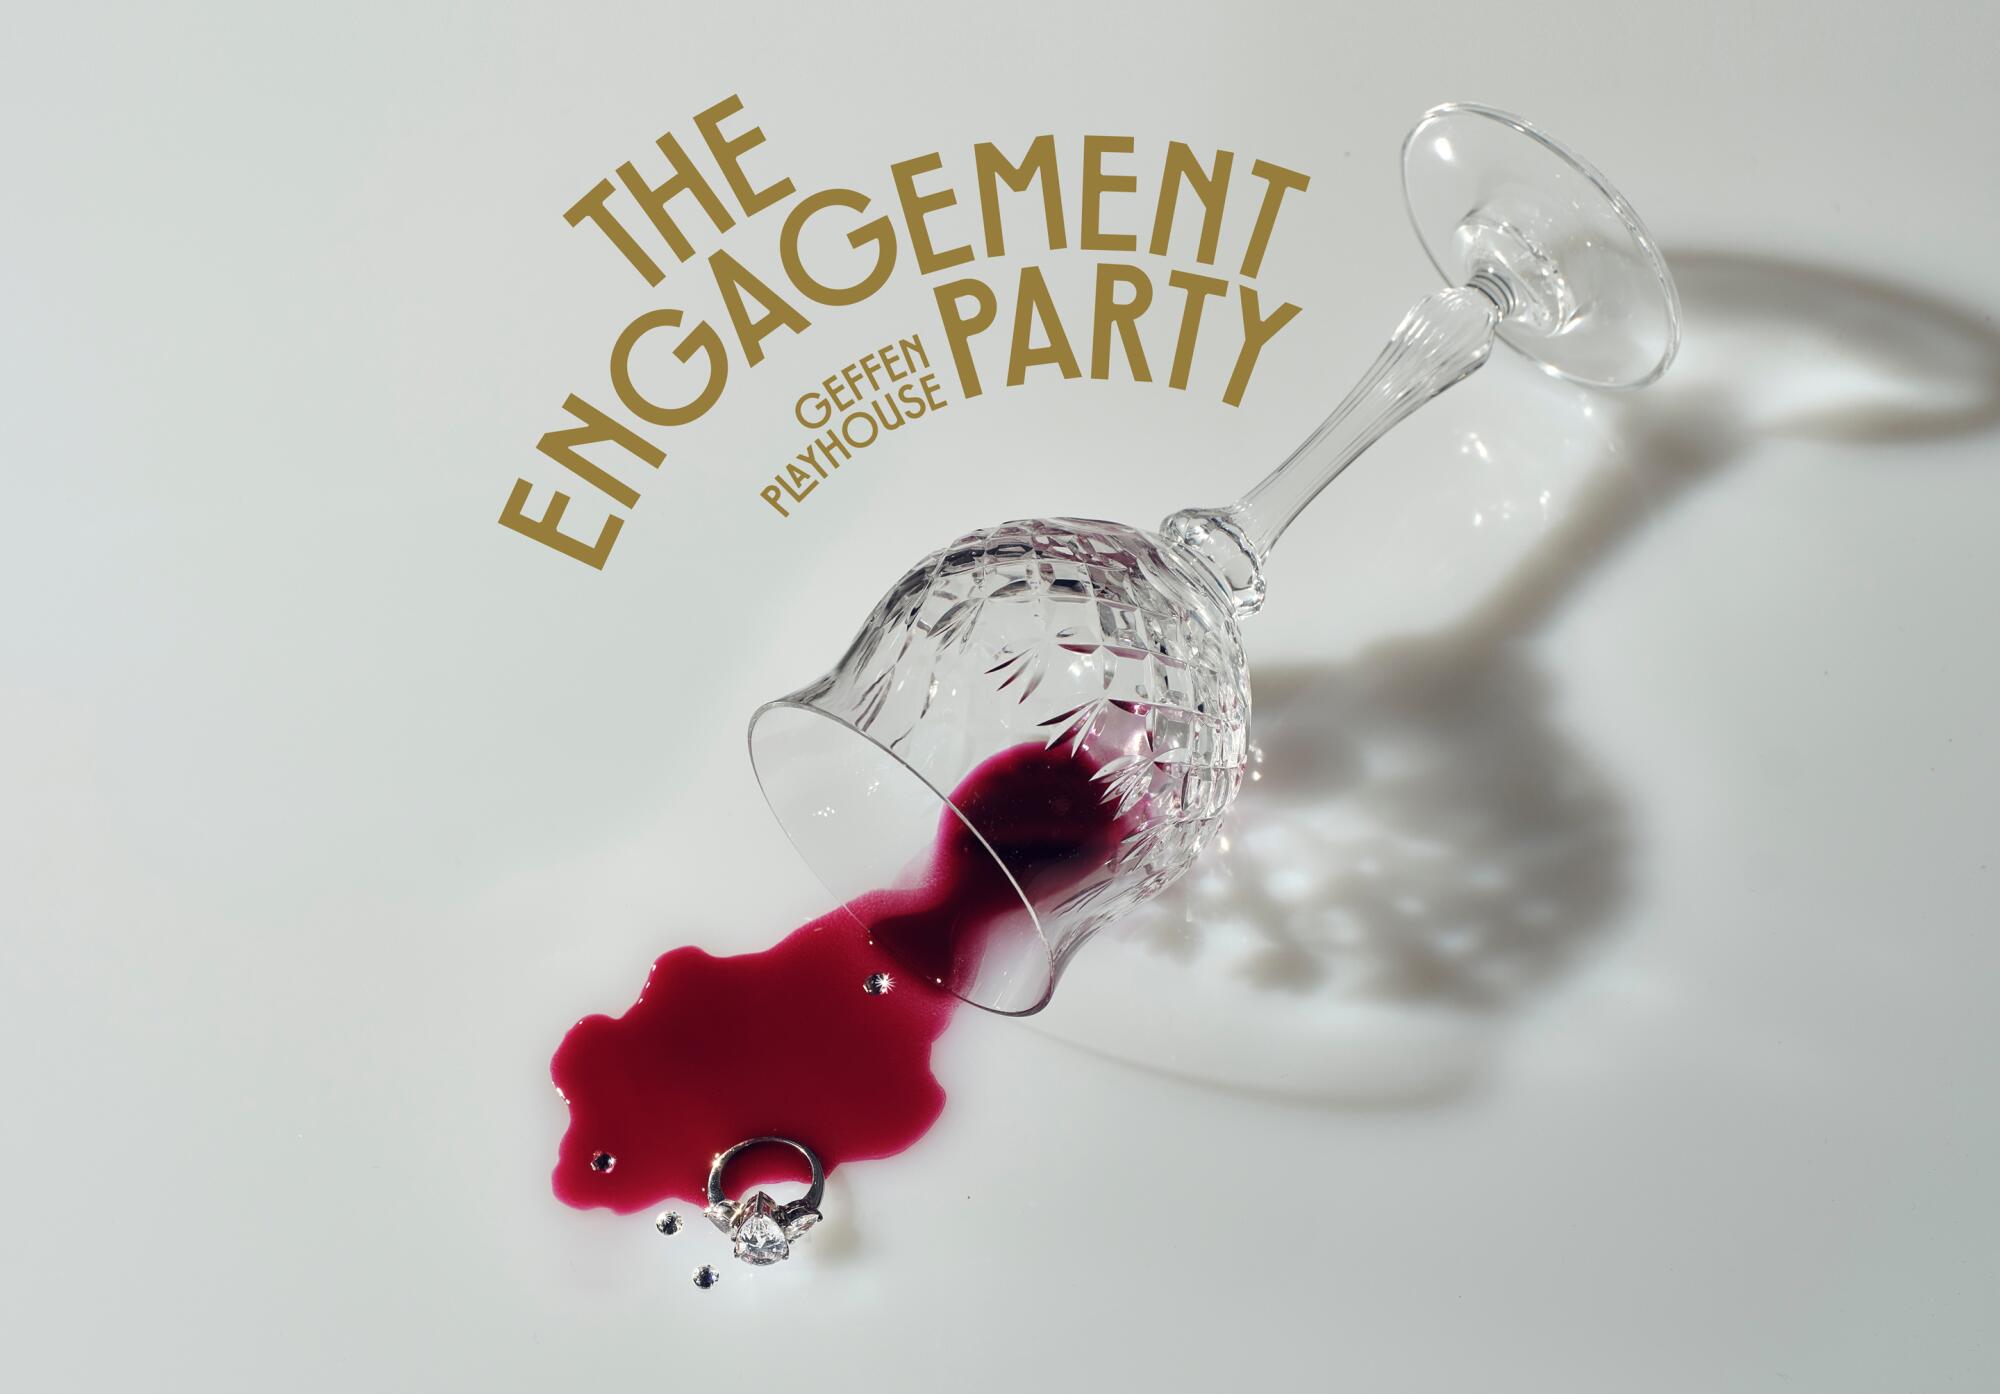 A flyer shows a spilled glass of red wine and an engagement ring.